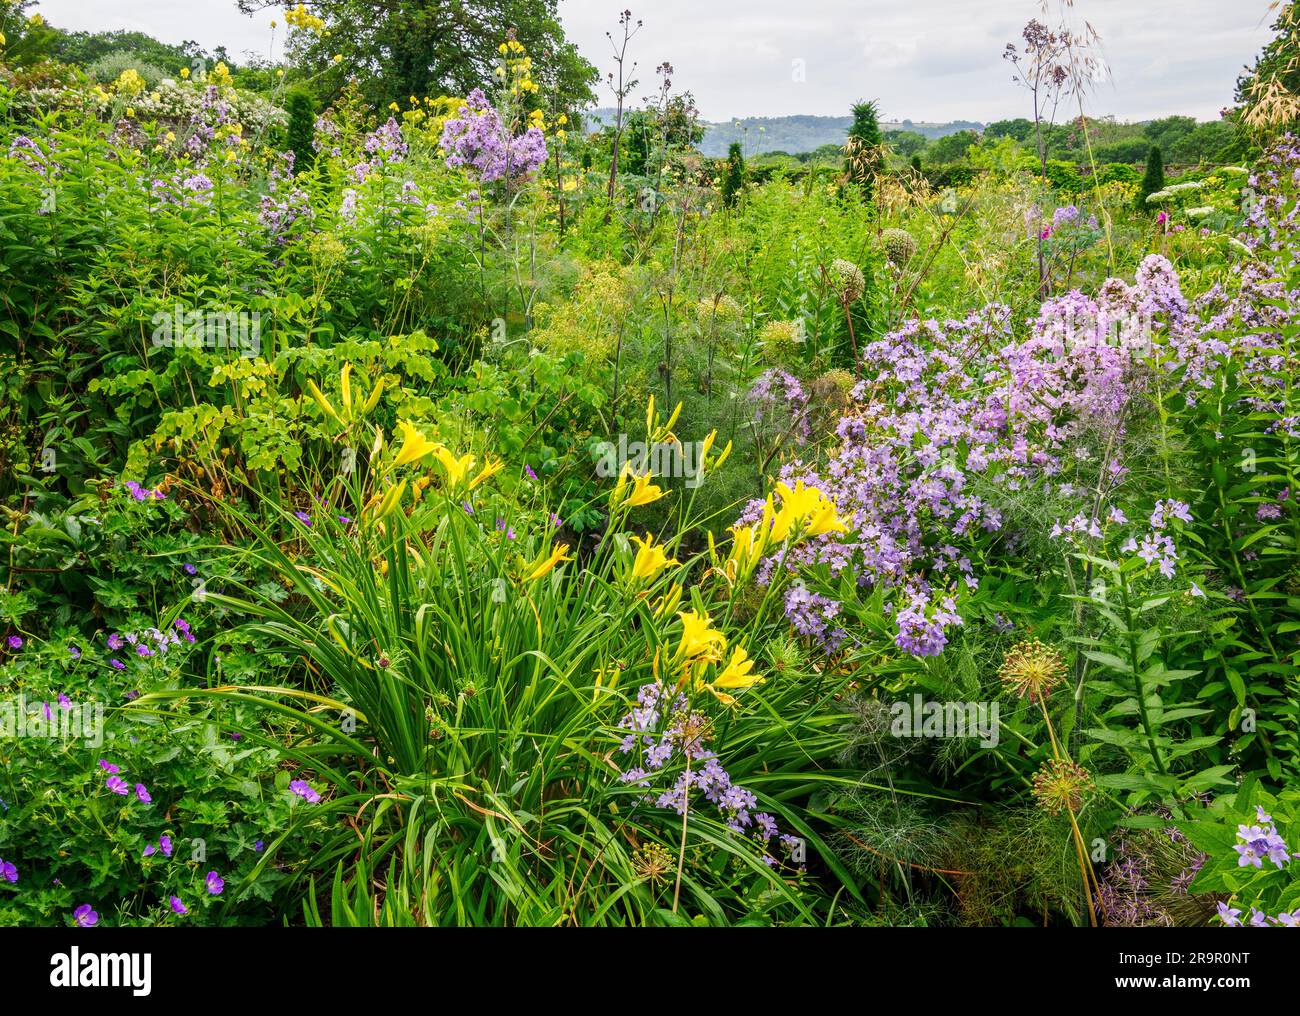 Exuberant planting of herbaceous borders at Aberglasney Gardens in South Wales UK featuring yellow Hemerocallis blue Campanula and Thalictrum Stock Photo